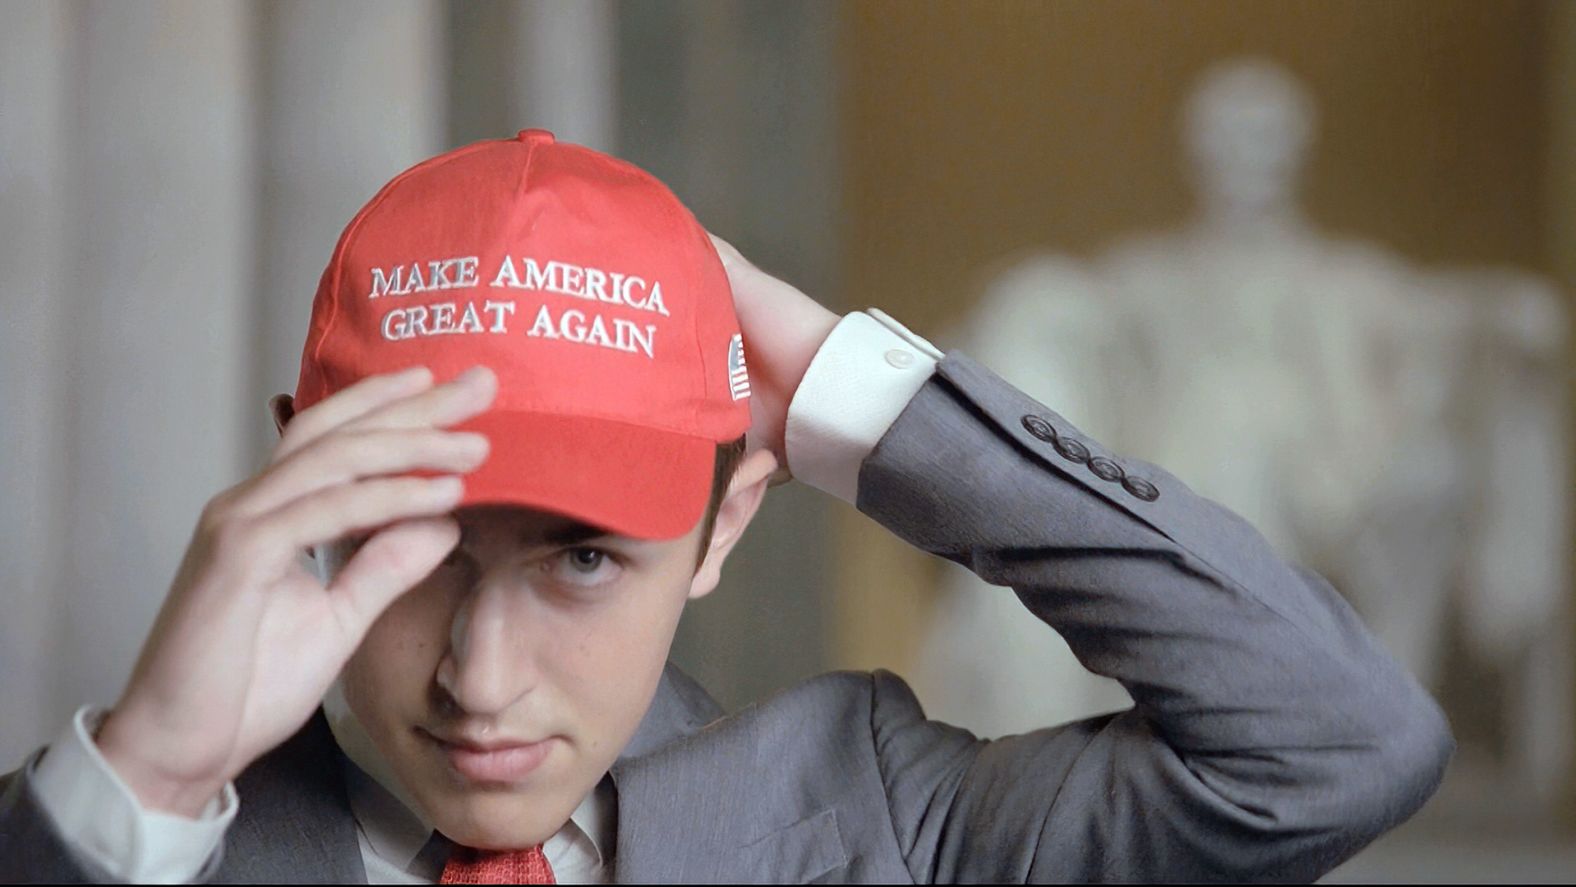 Nicholas Sandmann, a Kentucky teenager who was at the center of a viral video controversy, used his personal story to condemn cancel culture and argue that Trump and conservatives are treated unfairly by the press. "While much more must be done, I look forward to the day that the media returns to providing balanced, responsible and accountable news coverage," <a href="index.php?page=&url=https%3A%2F%2Fwww.cnn.com%2Fpolitics%2Flive-news%2Frnc-2020-day-2%2Fh_0cb227ccf4ca0b24323c589d490d49b4" target="_blank">he said Tuesday.</a>